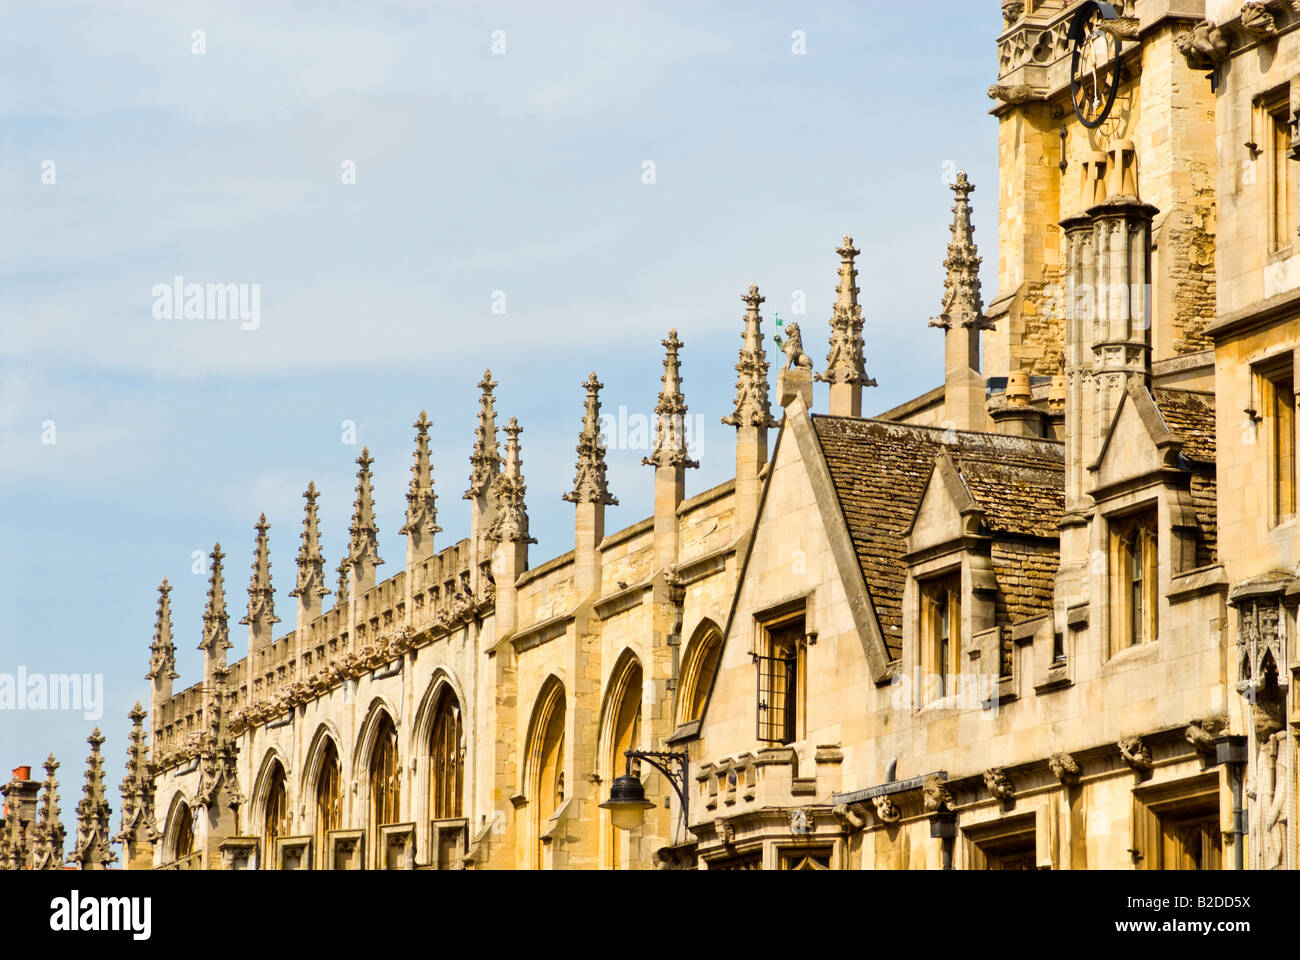 Architectural detail on All Souls College, Oxford, England Stock Photo